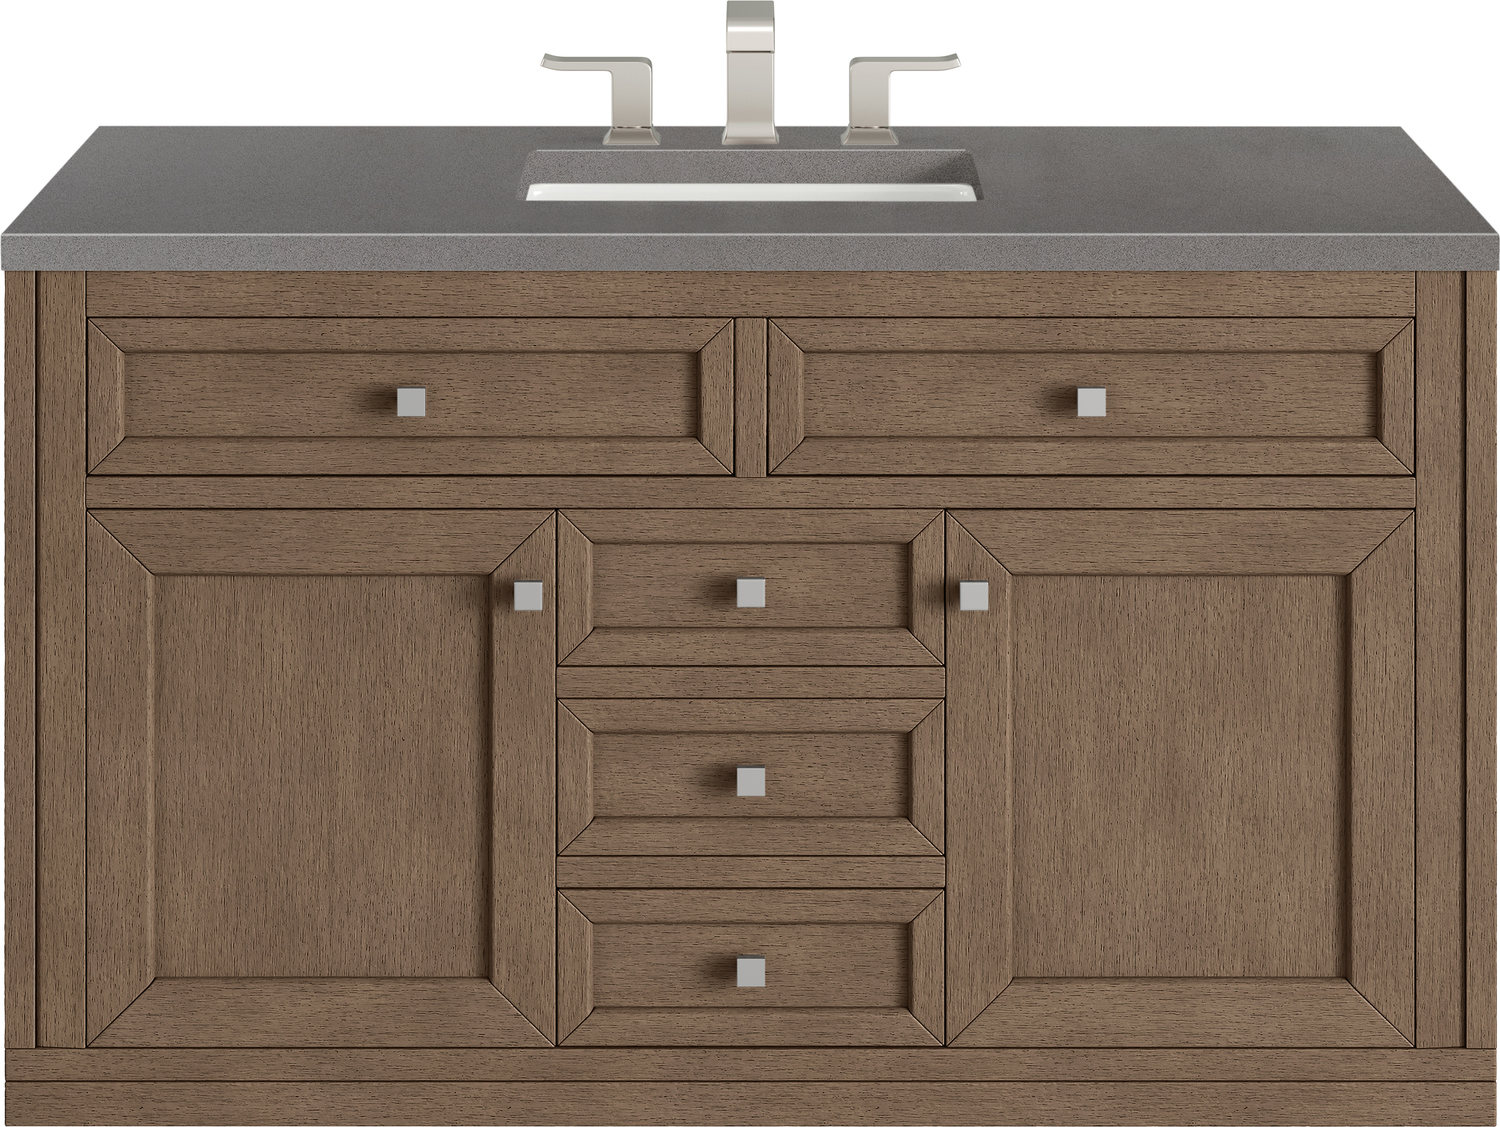 90 inch double vanity James Martin Vanity Whitewashed Walnut Contemporary/Modern, Transitional